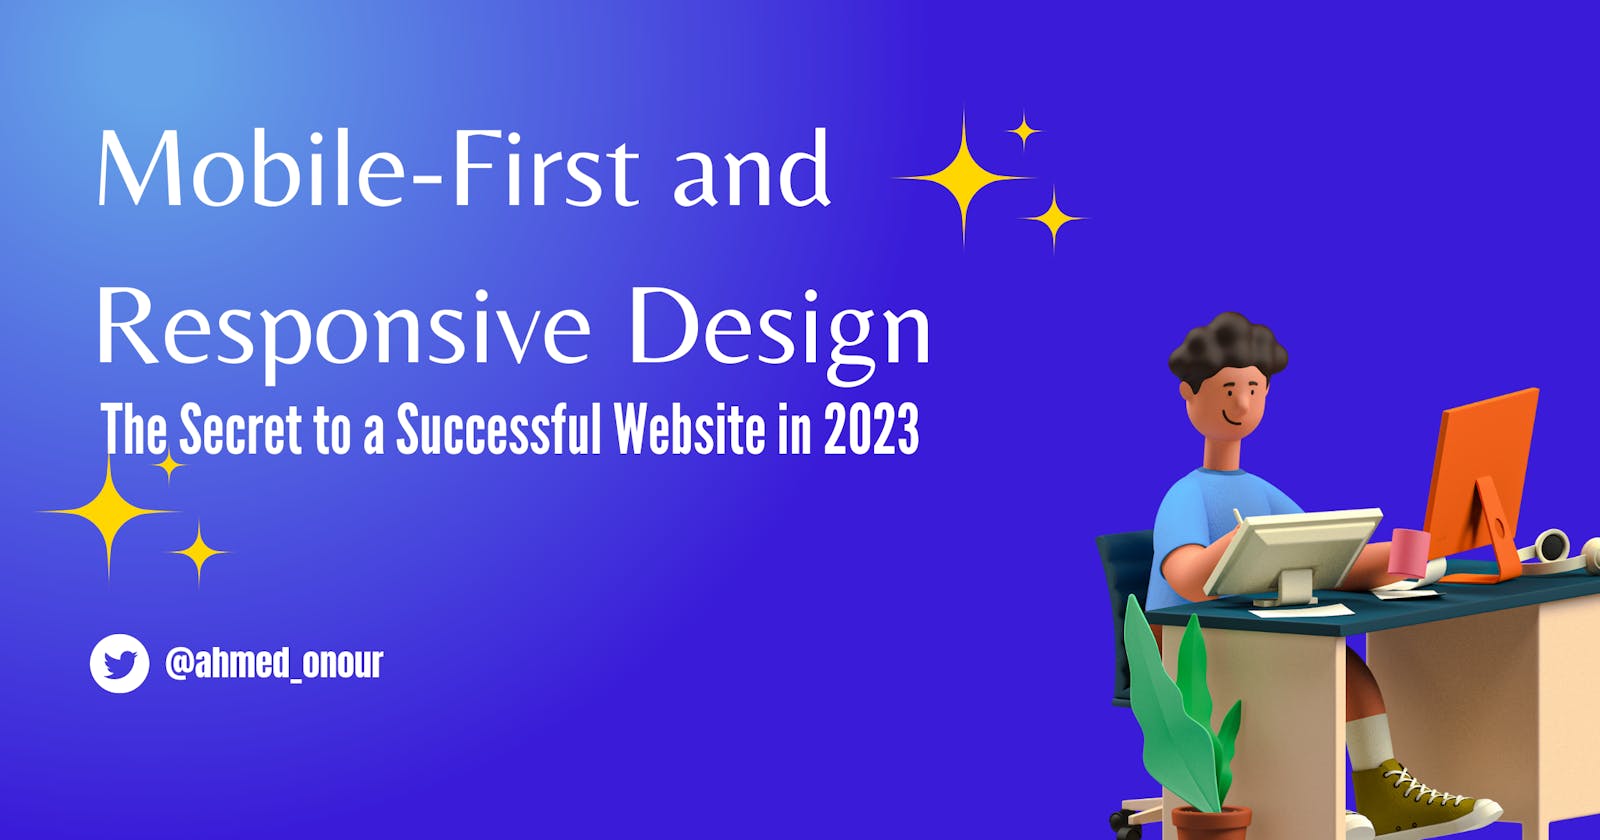 Mobile-First and Responsive Design: The Secret to a Successful Website in 2023